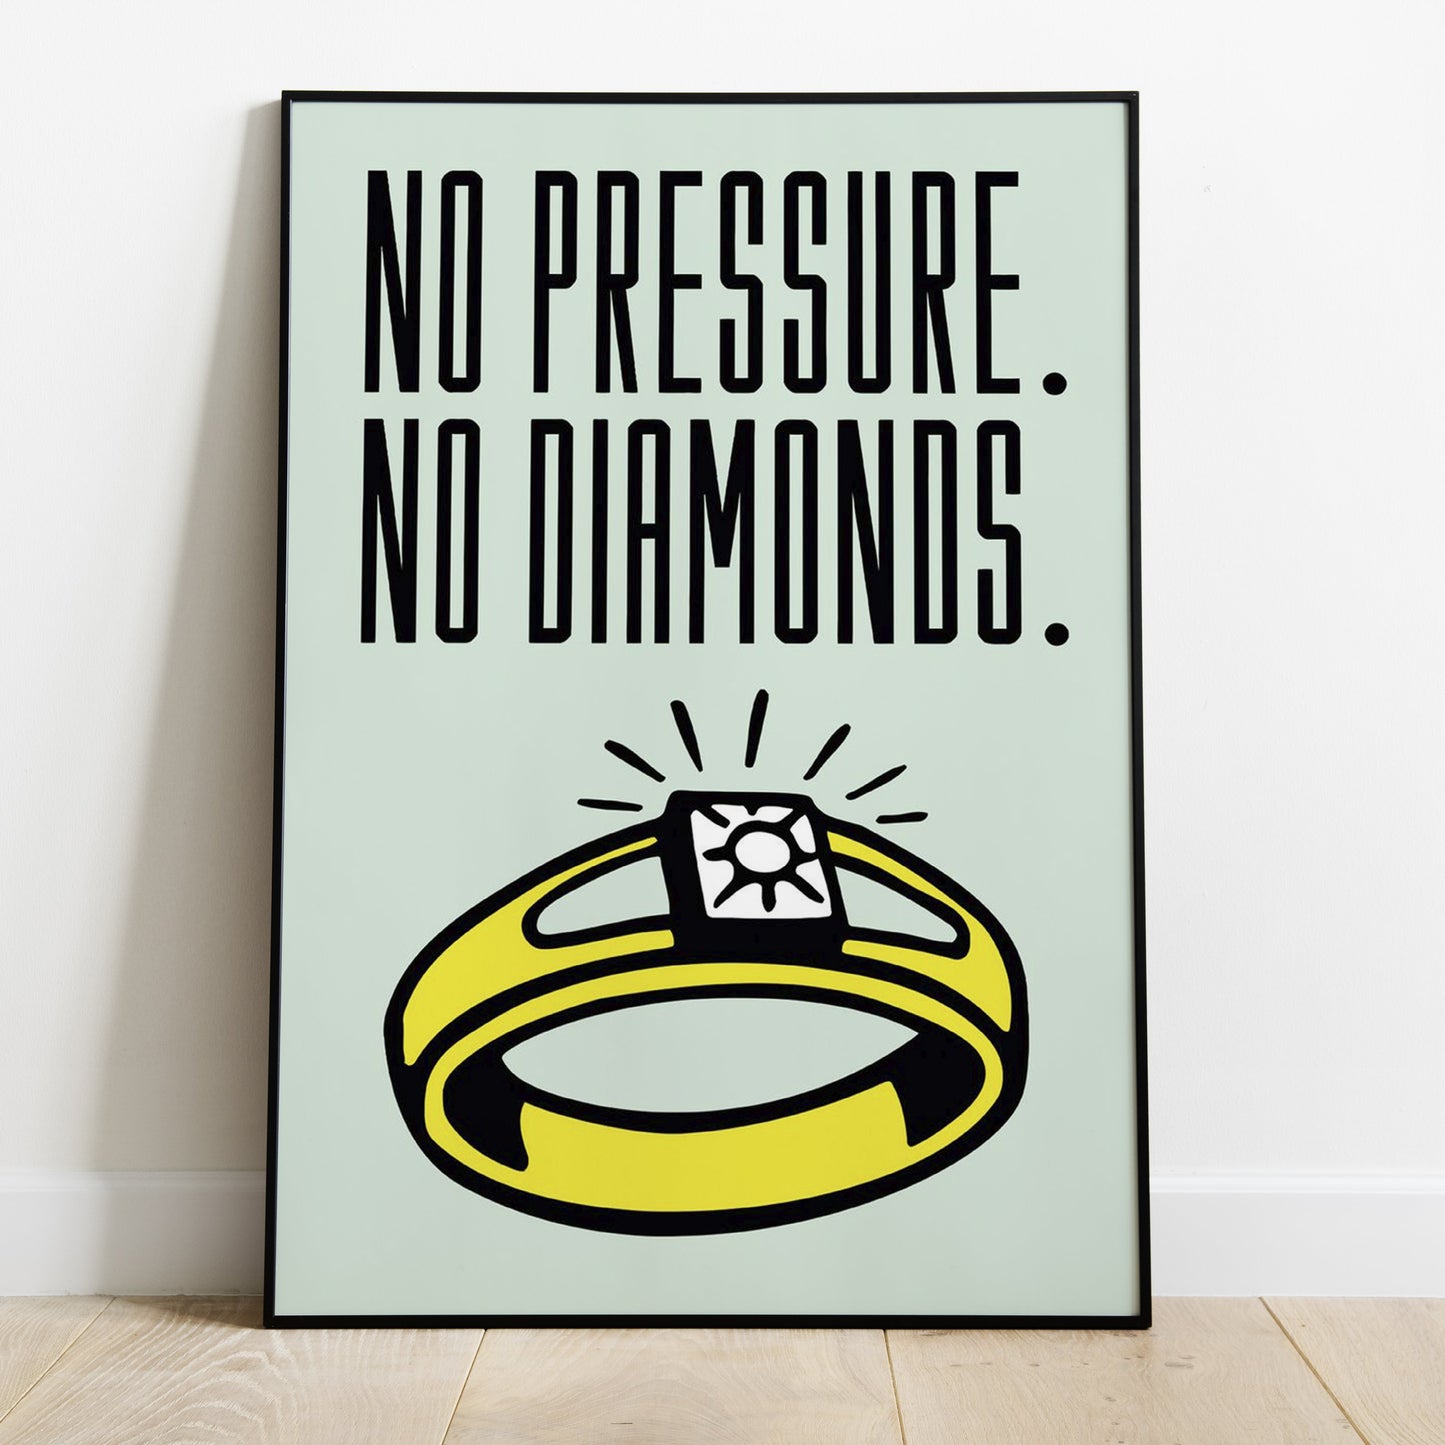 NO PRESSURE NO DIAMONDS Wall Art Poster for Home Office